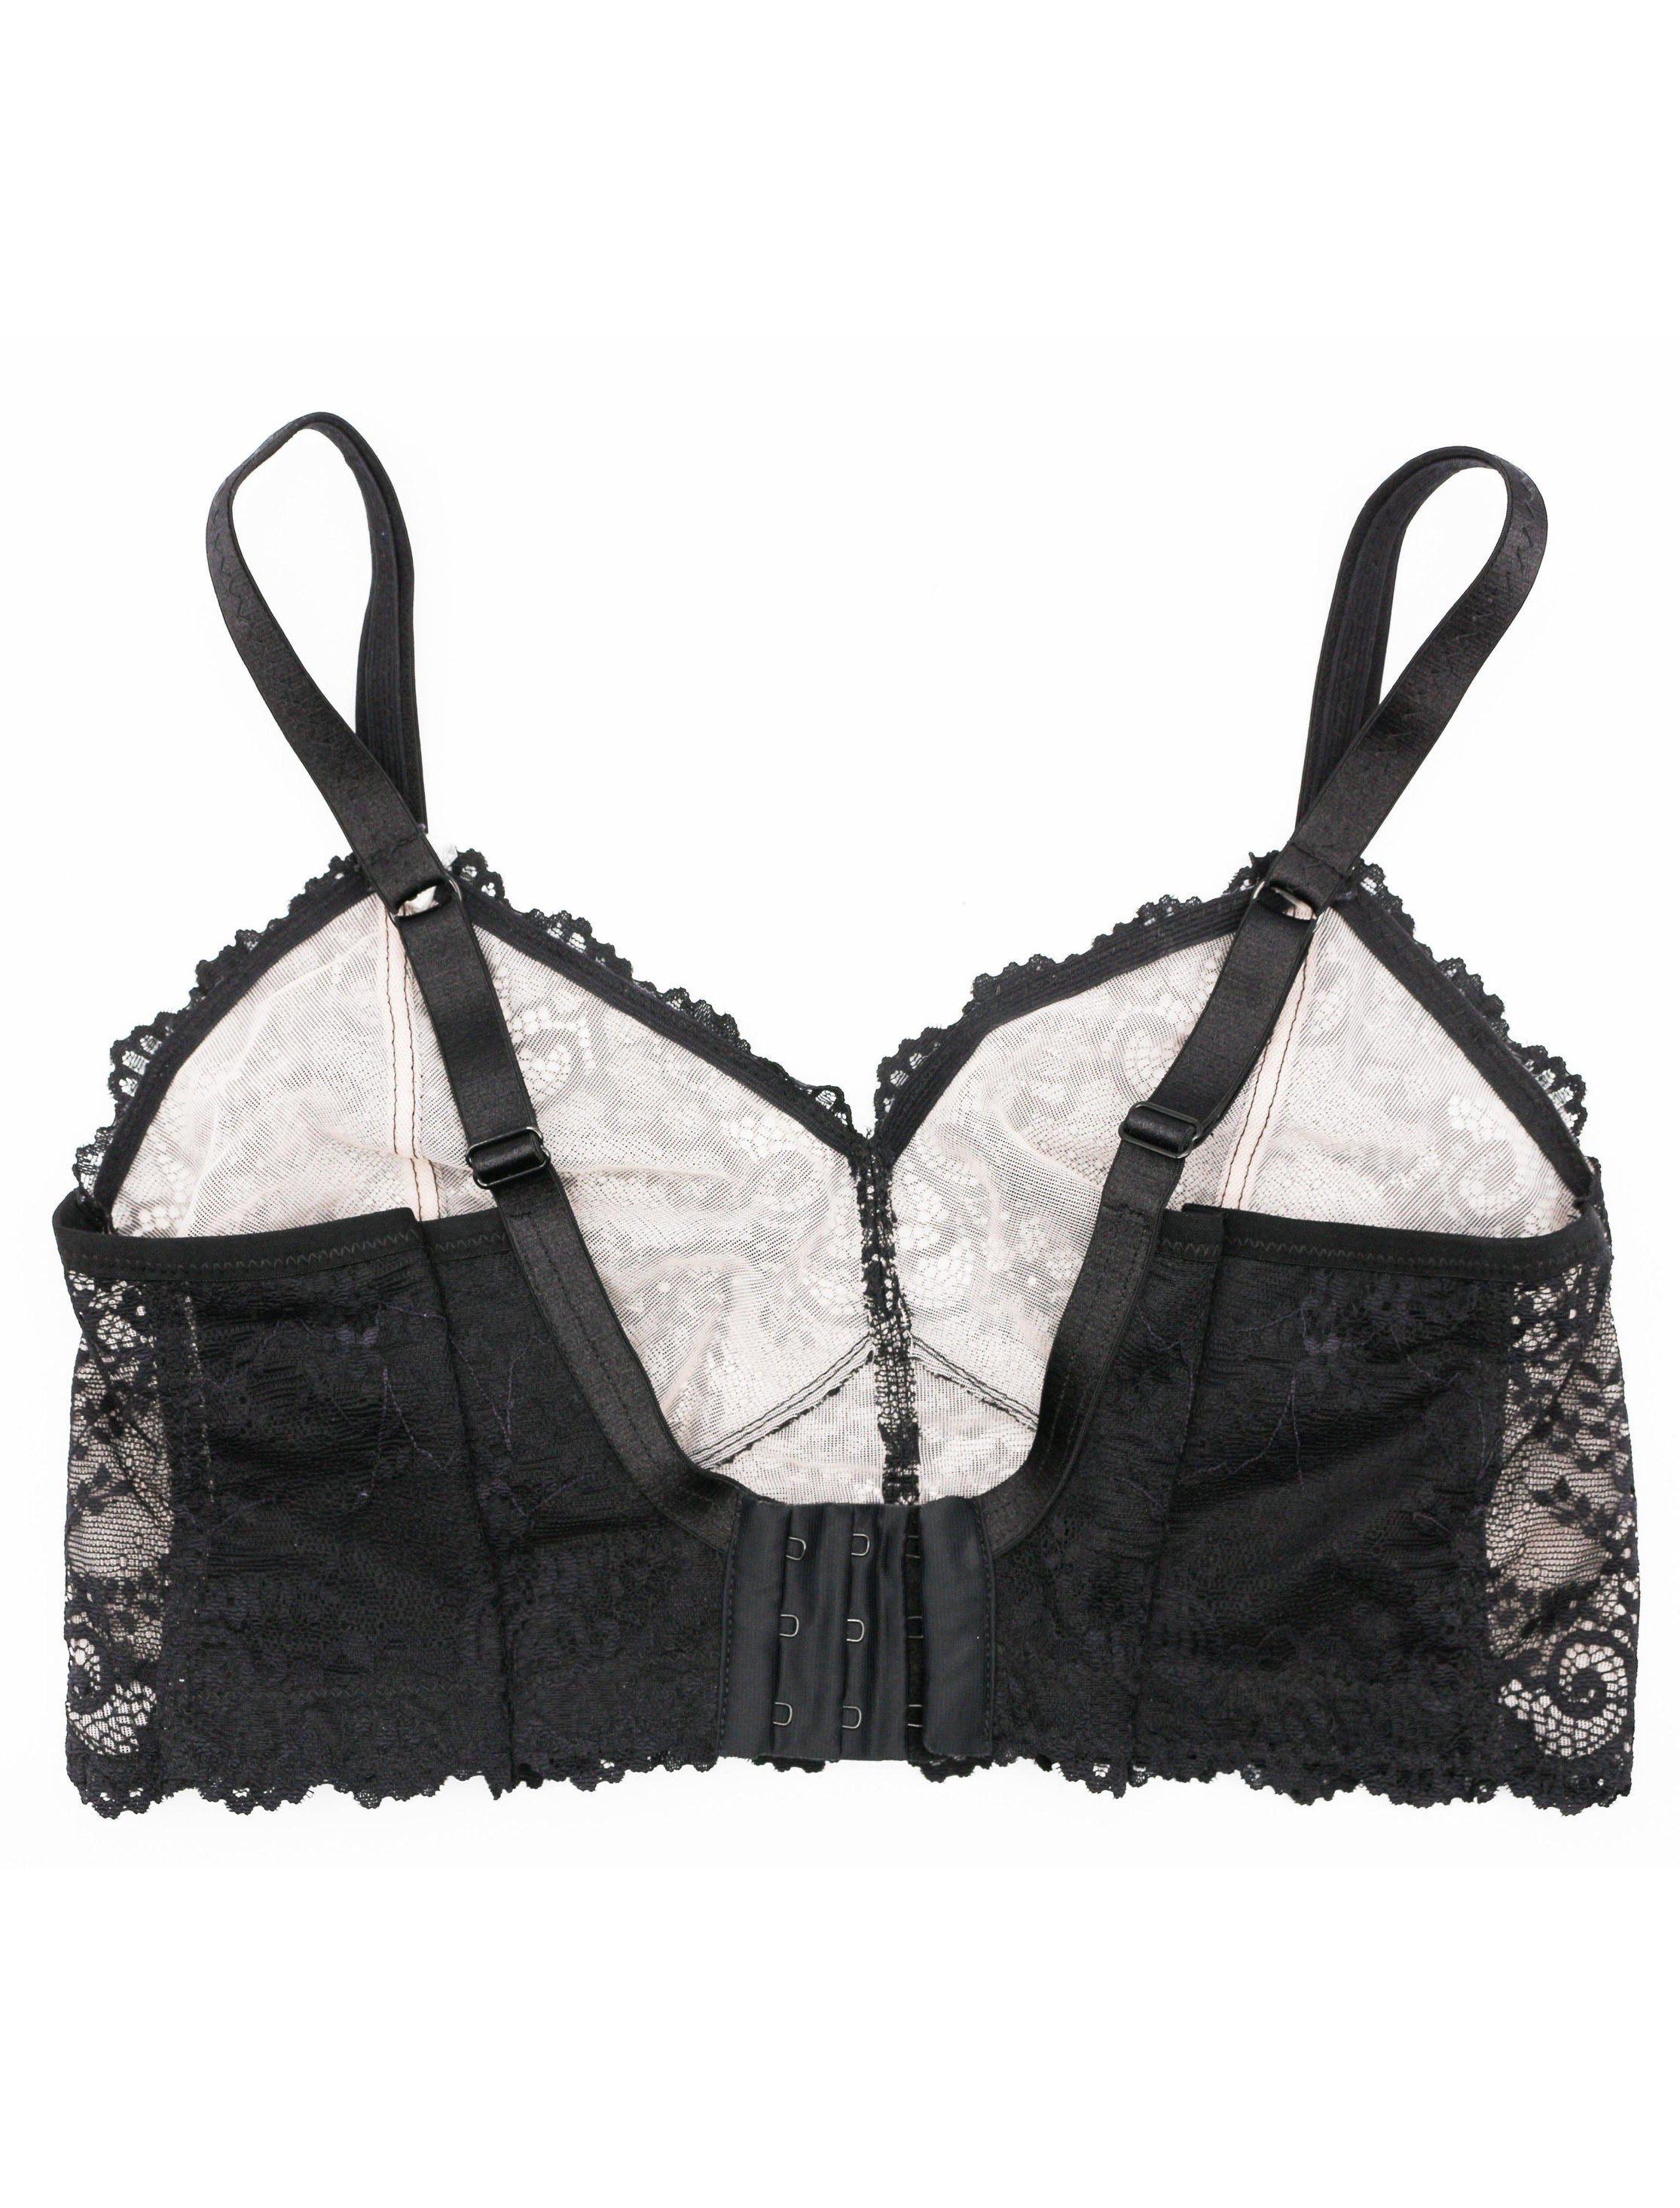 Custom made wireless bra in black scalloped lace fabric made to order by Rubies Bras.